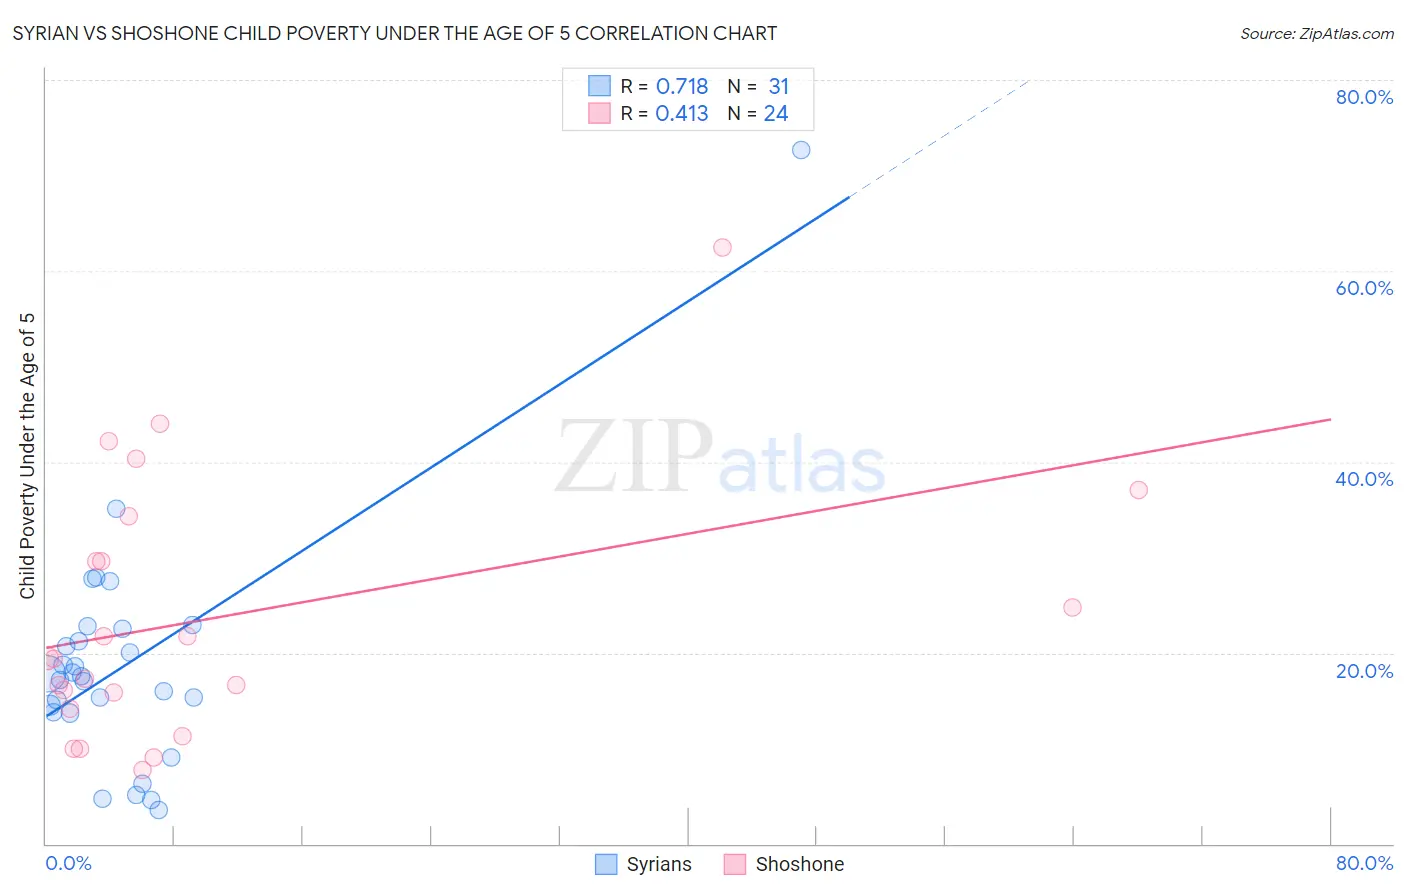 Syrian vs Shoshone Child Poverty Under the Age of 5